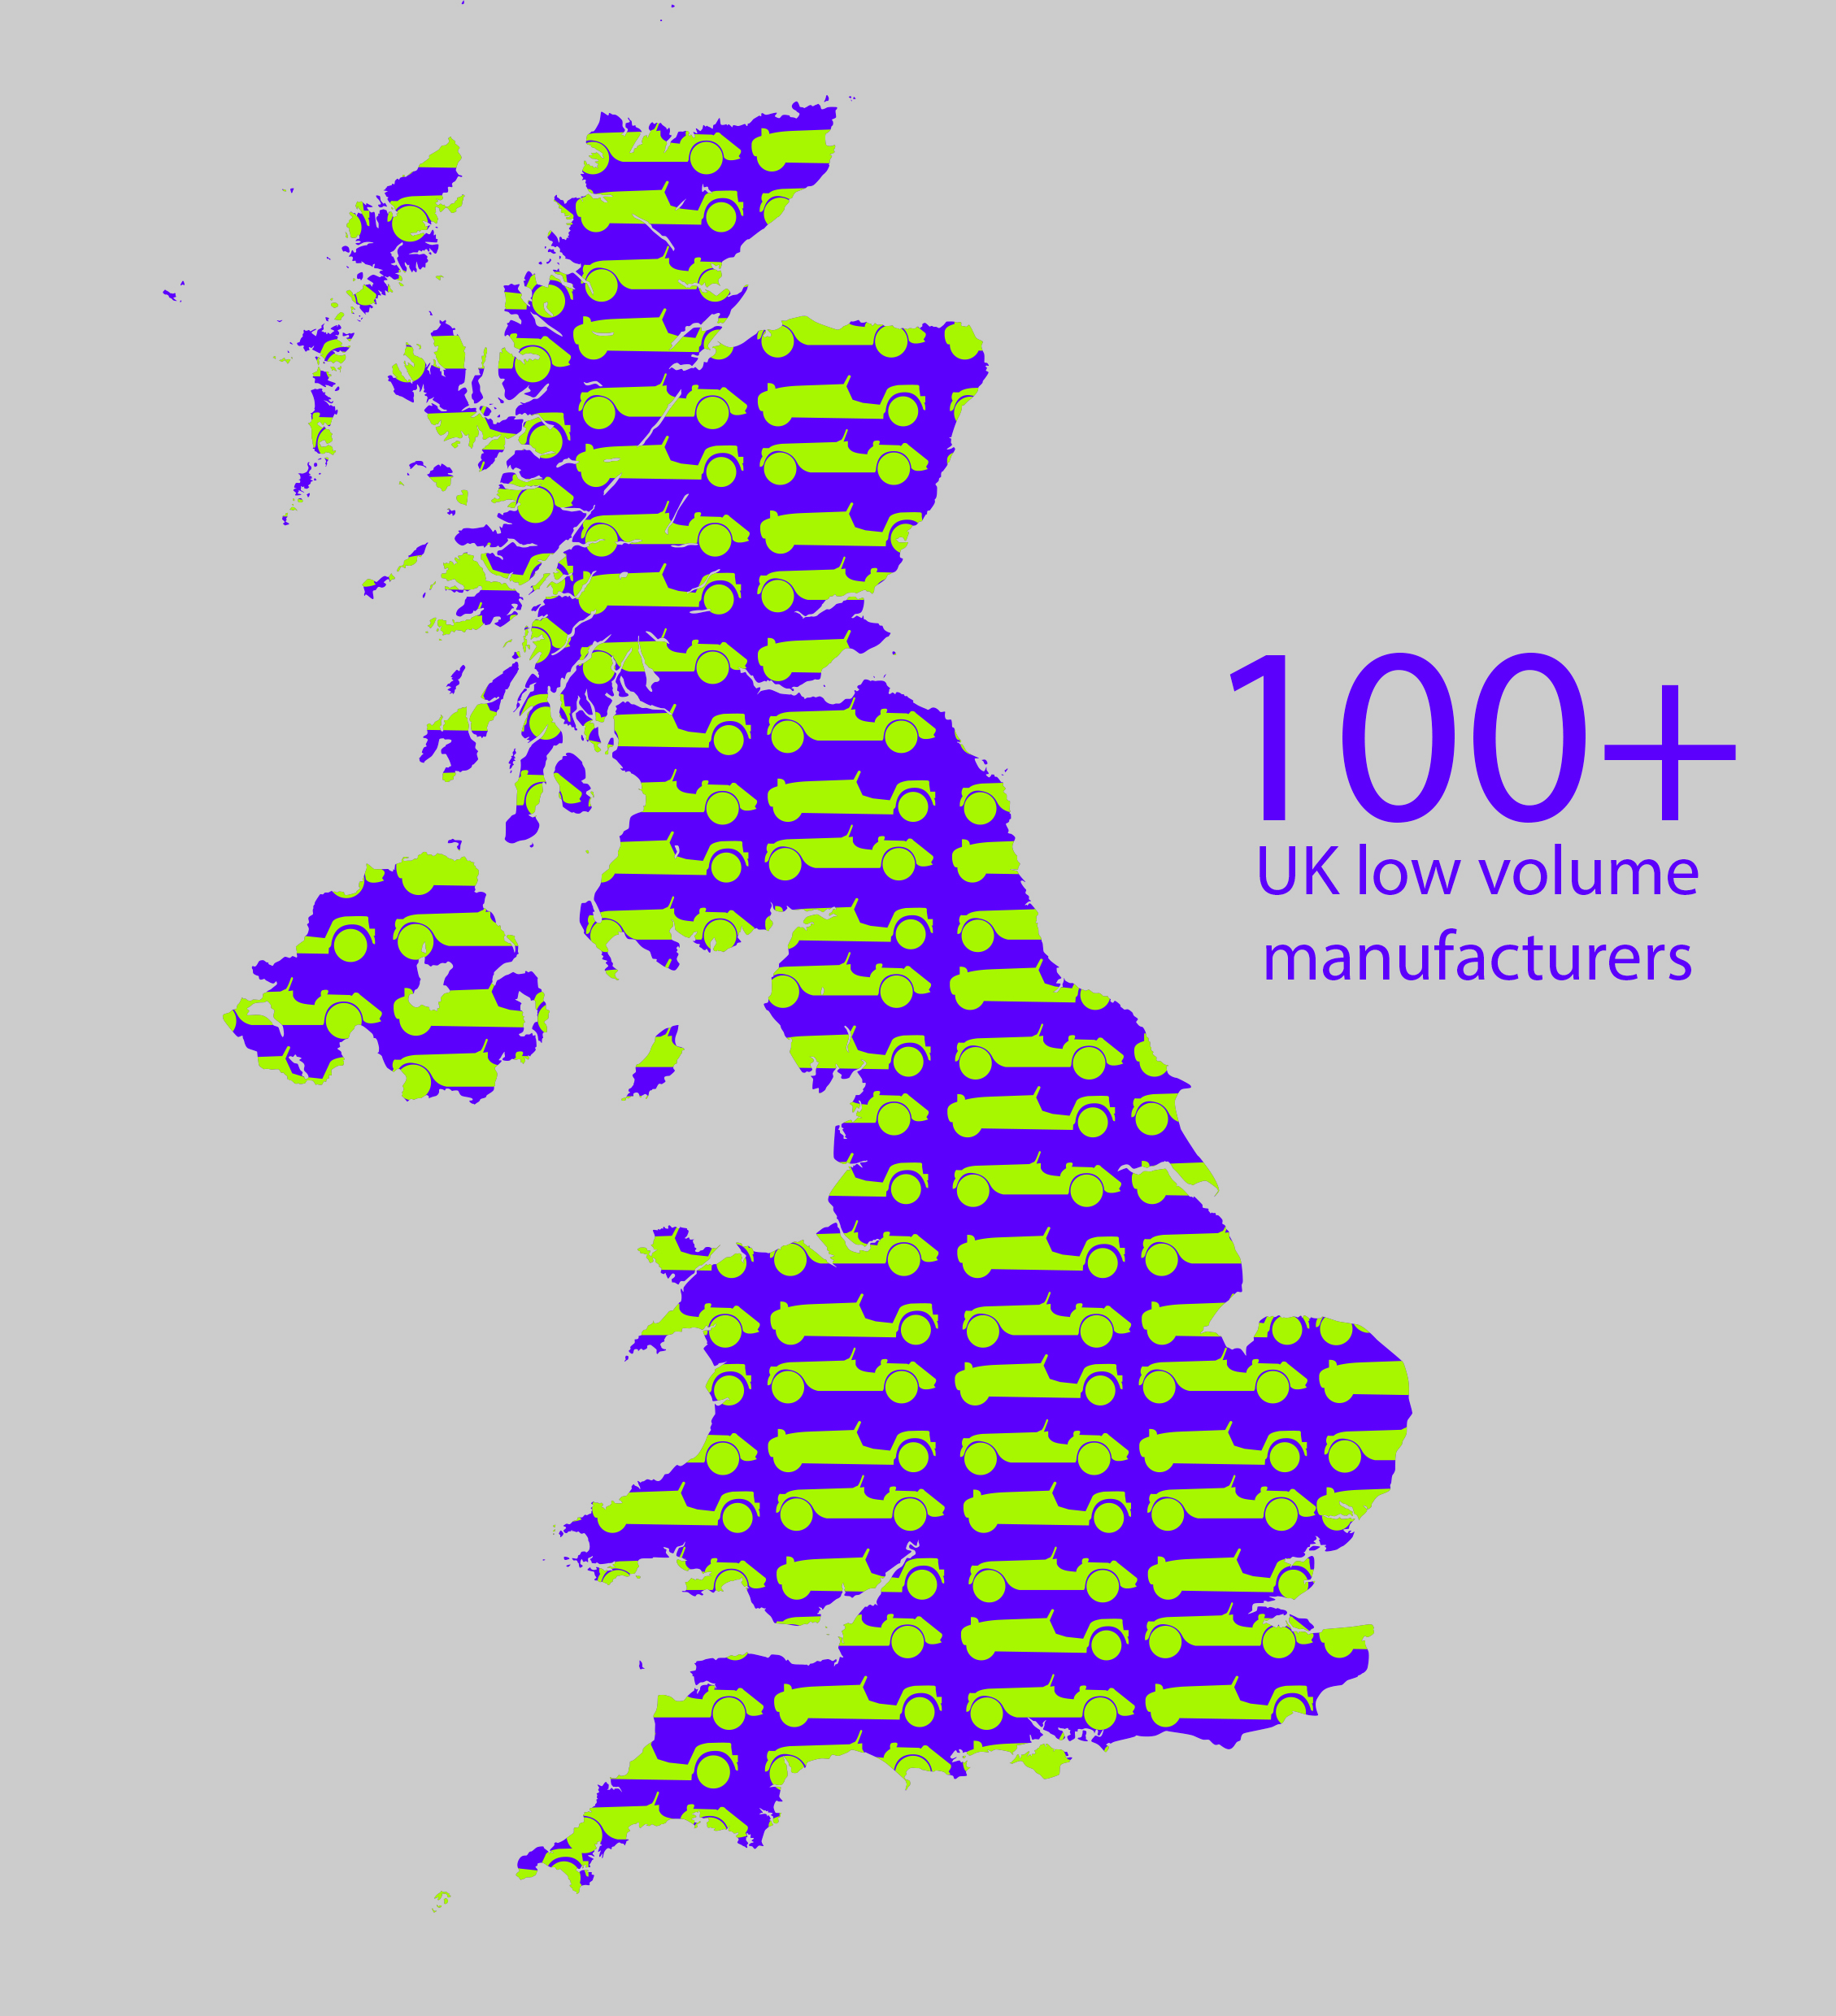 There are over 100 low volume manufacturers in the UK